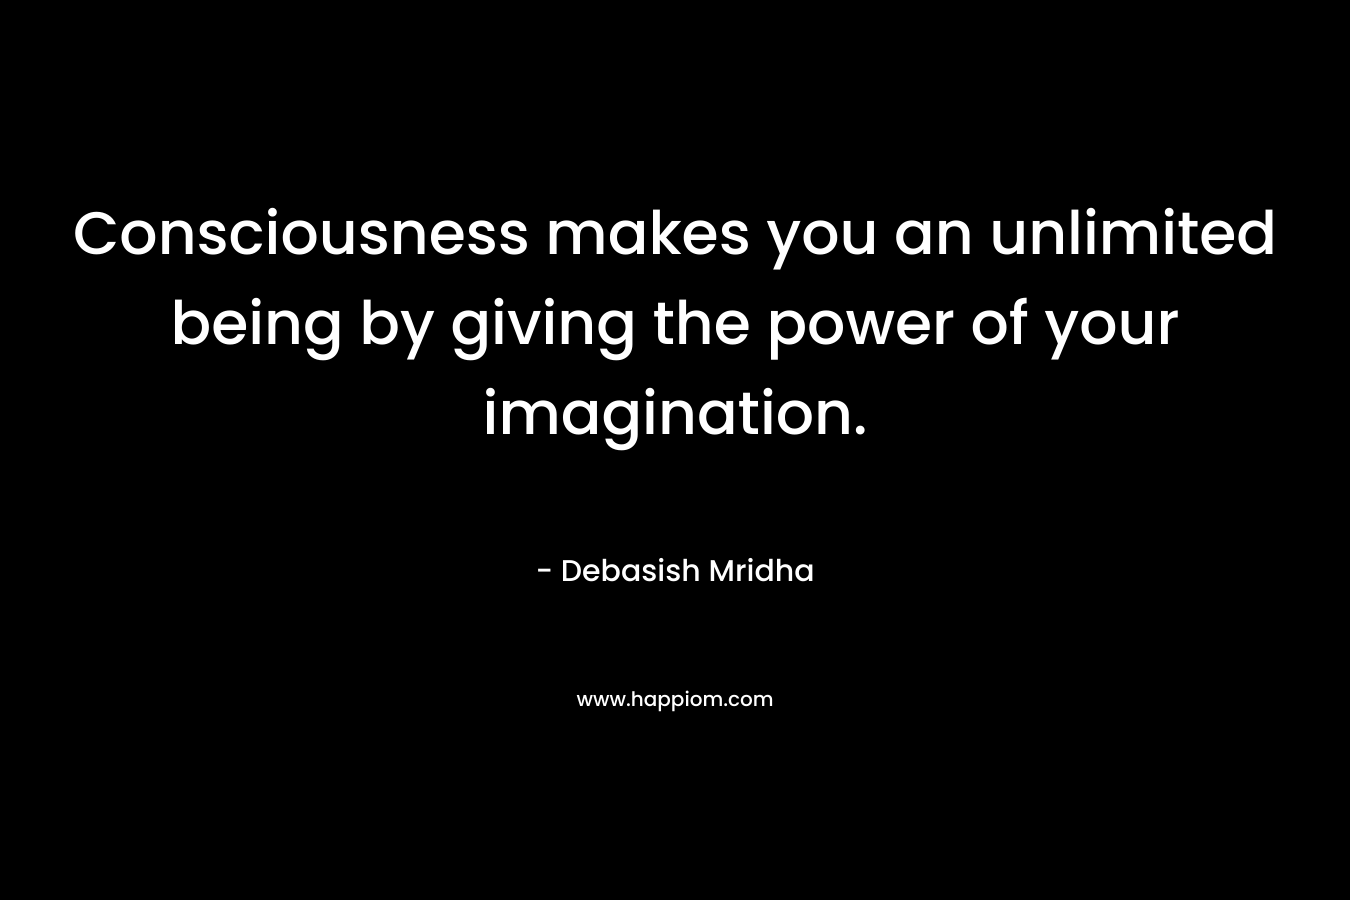 Consciousness makes you an unlimited being by giving the power of your imagination.